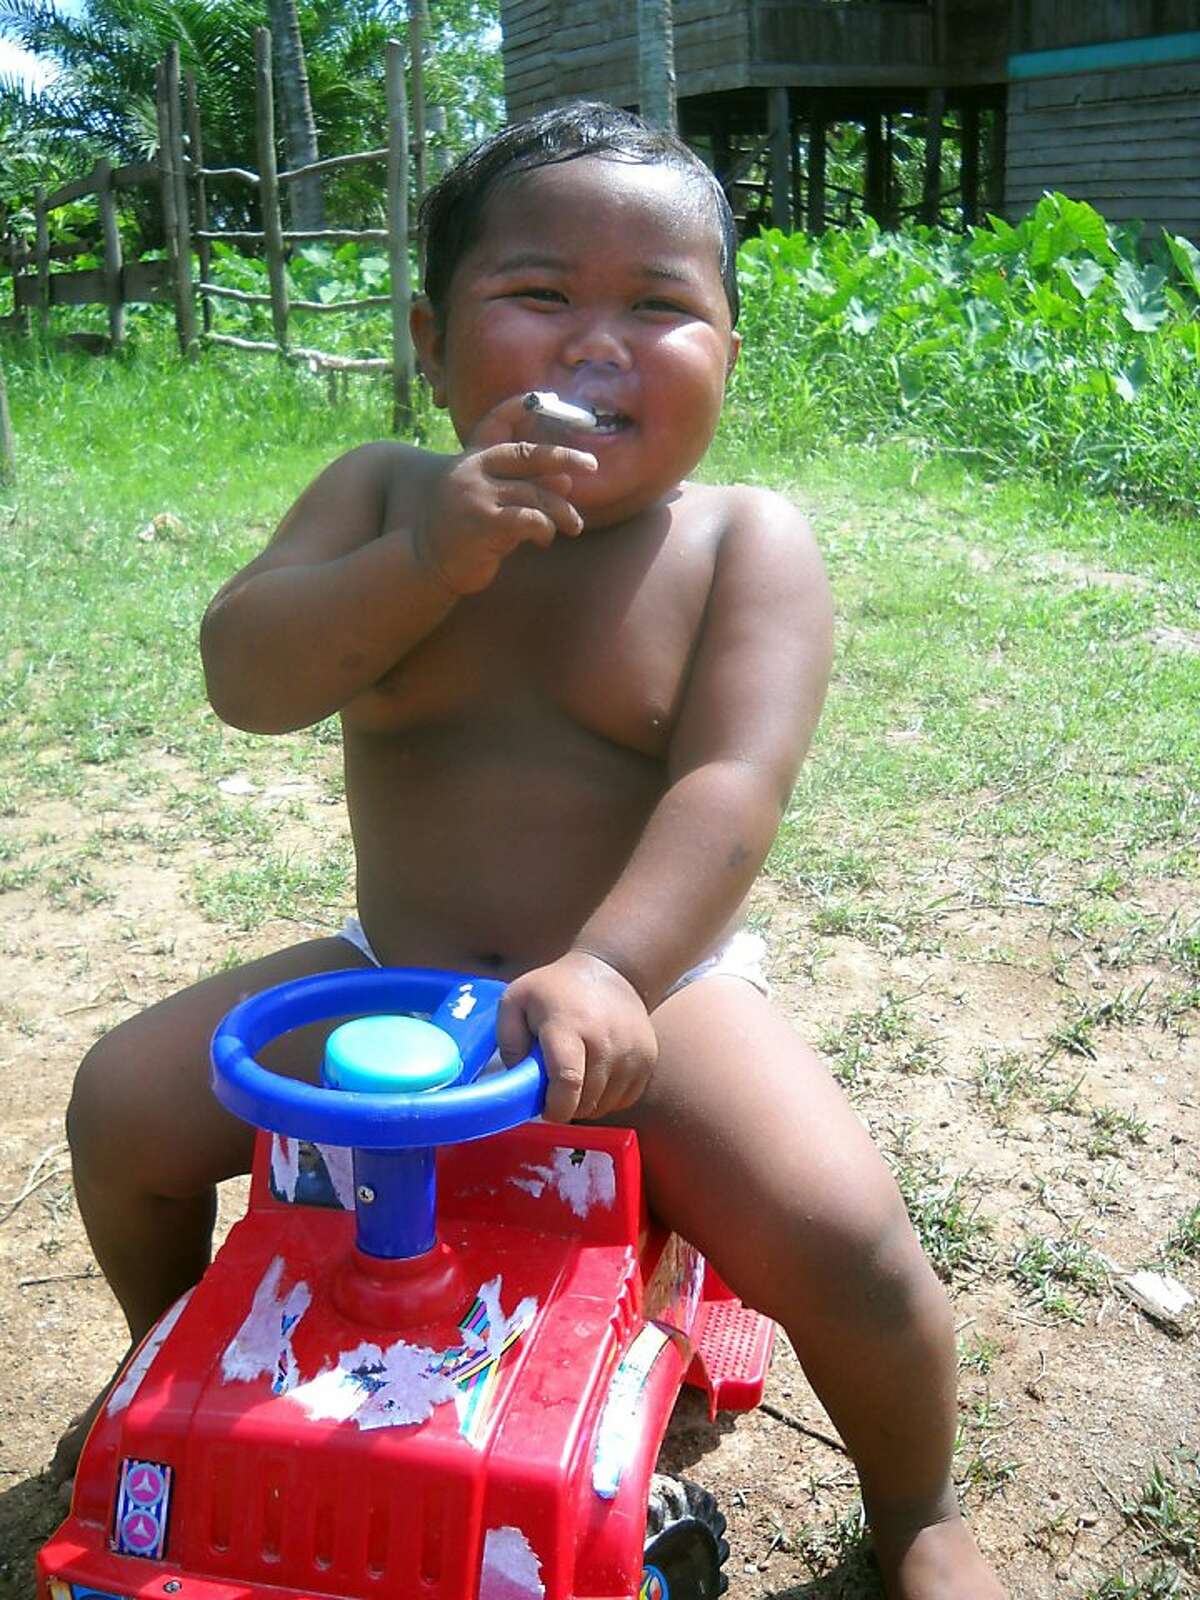 In this photograph taken on May 16, 2010 two-year-old Indonesian boy Ardi Rizal puffs on a cigarette while playing on a plastic toy jeep in the yard of his family home in a village on Sumatra island. A new video of a smoking Indonesian toddler has emerged to shock health experts and provide further graphic illustration of the Southeast Asian country's growing addiction to tobacco. His father reportedly gave him his first cigarette when he was 18 months old and now he smokes 40 a day. Child Protection Ministry official Heru Kasidi said the family would be investigated for what would be considered a clear case of child abuse in many countries.